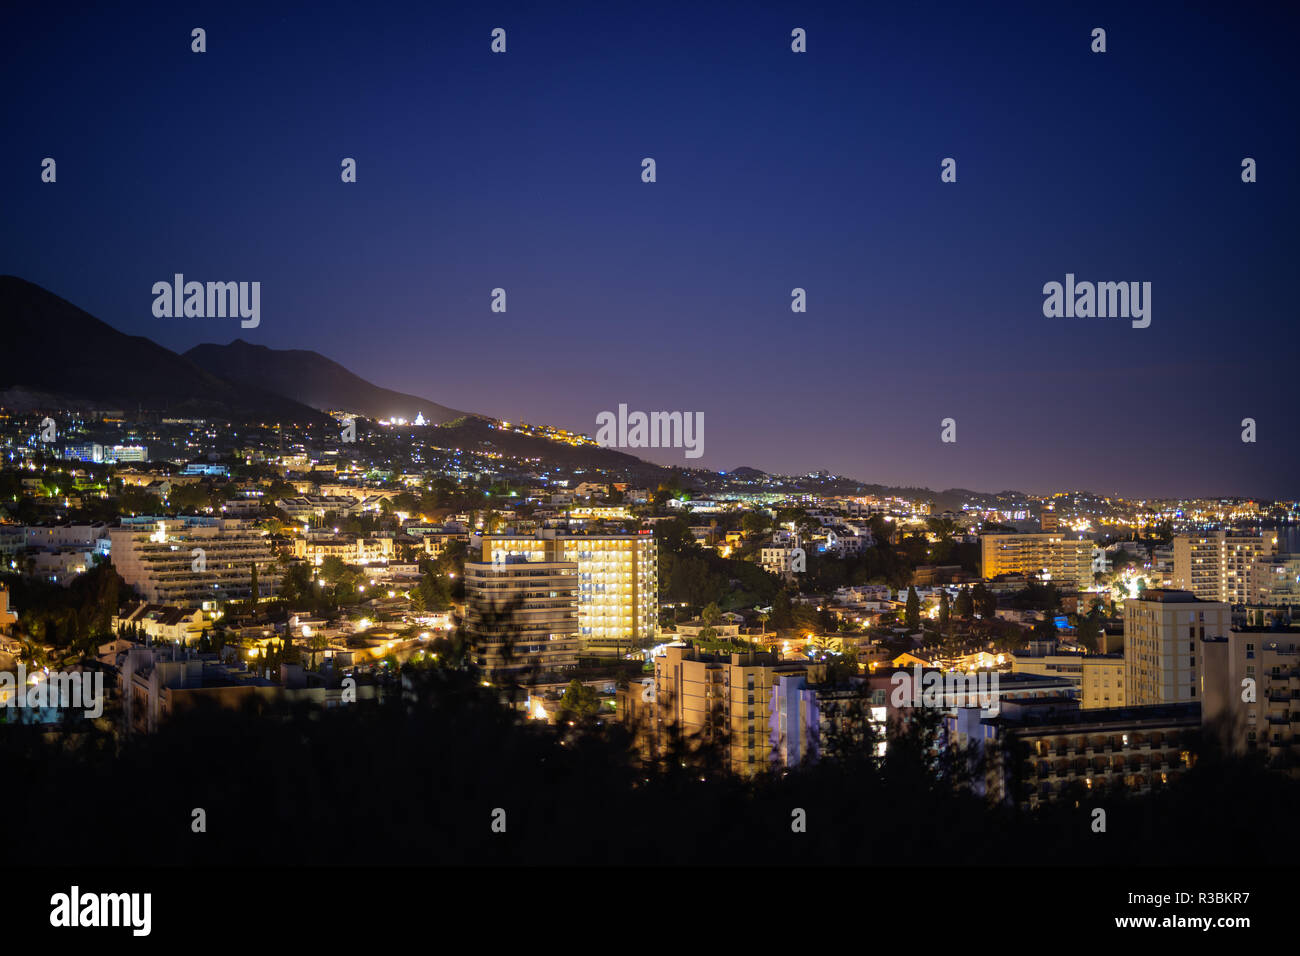 Beautiful Night View On Top Of Hill Overlooking The City Of Malaga Spain At Night Stock Photo Alamy